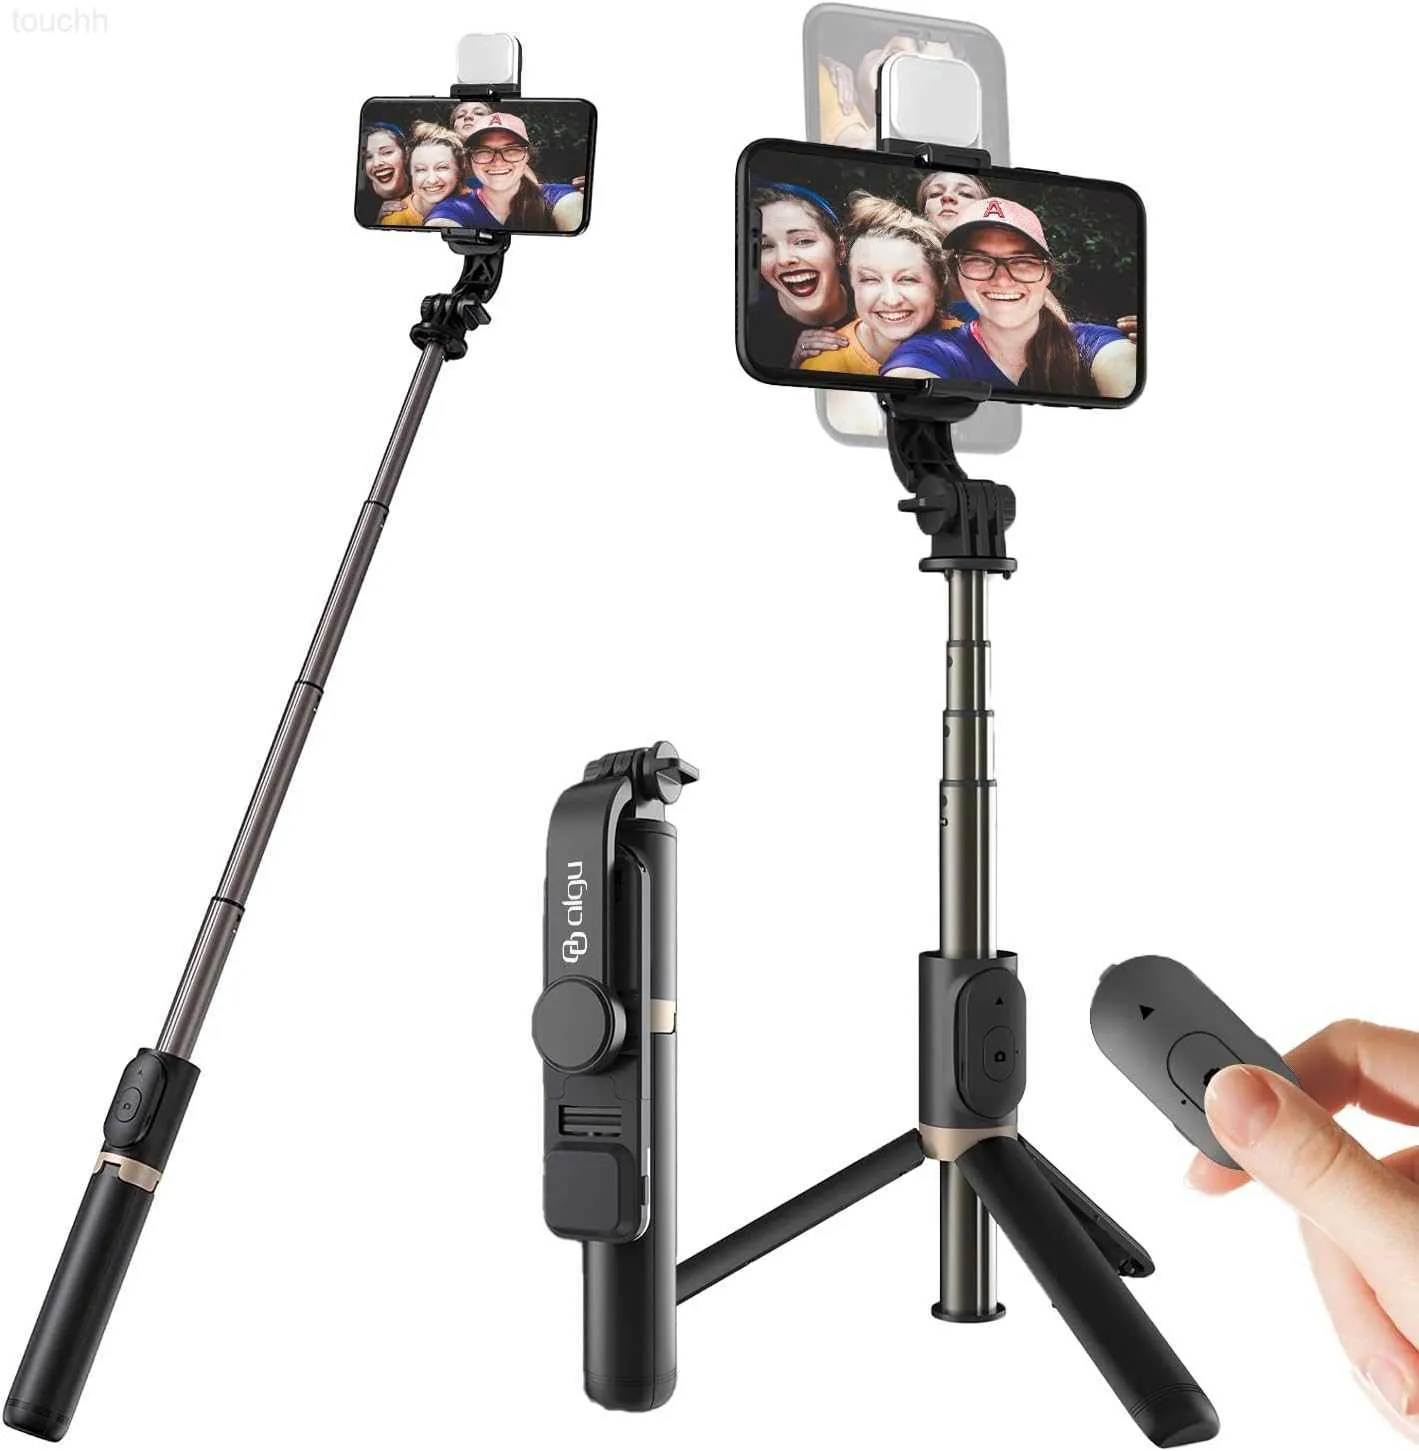 Selfie stick with tripod rechargeable LED fill light and remote control for iPhone and Android phones. Retractable aluminum selfie stick tripod L230913L20309013